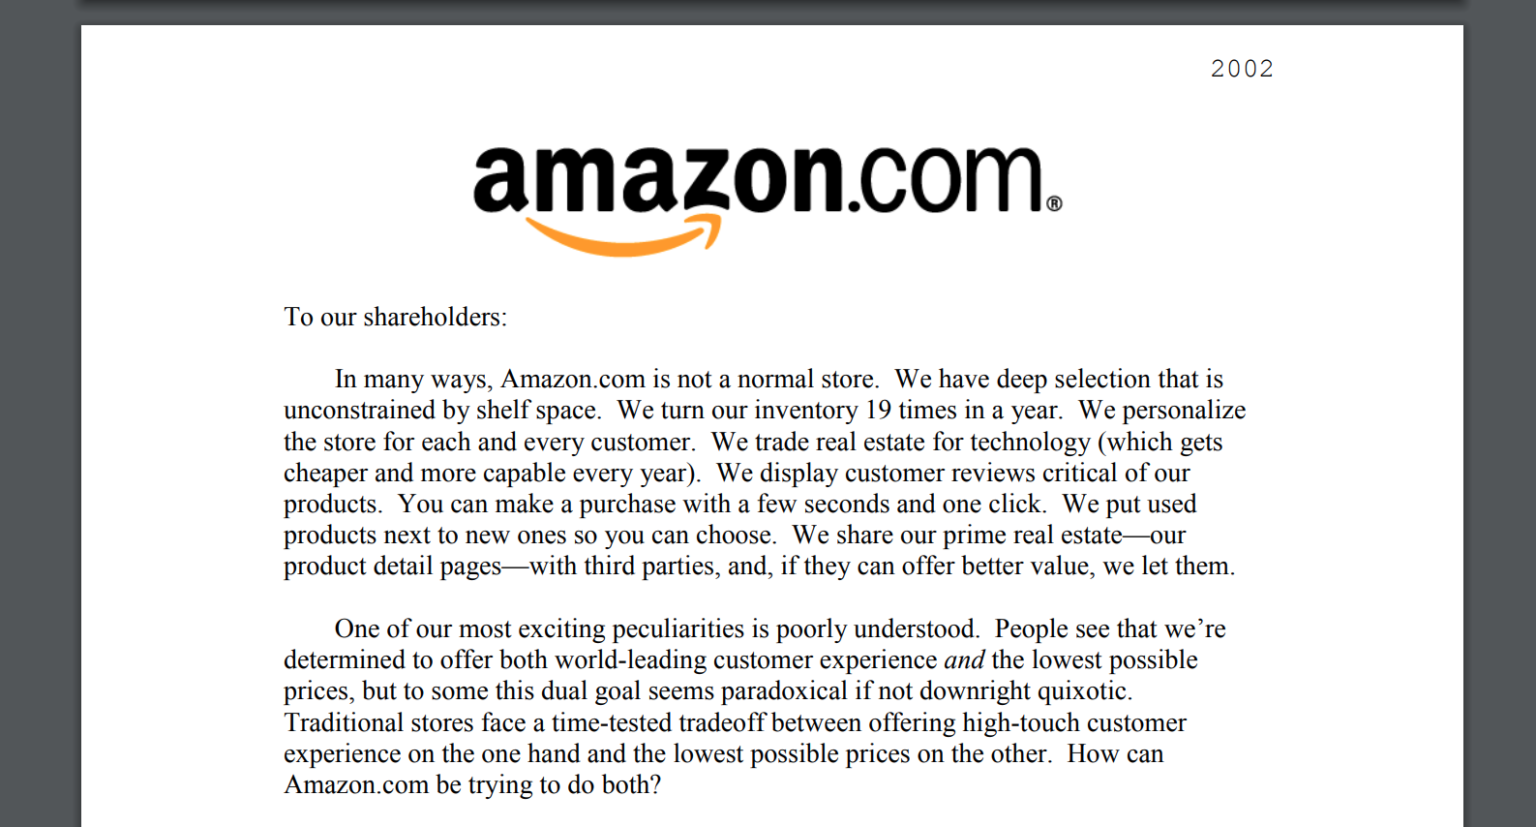 amazon-s-shareholder-letters-a-must-read-for-product-managers-the